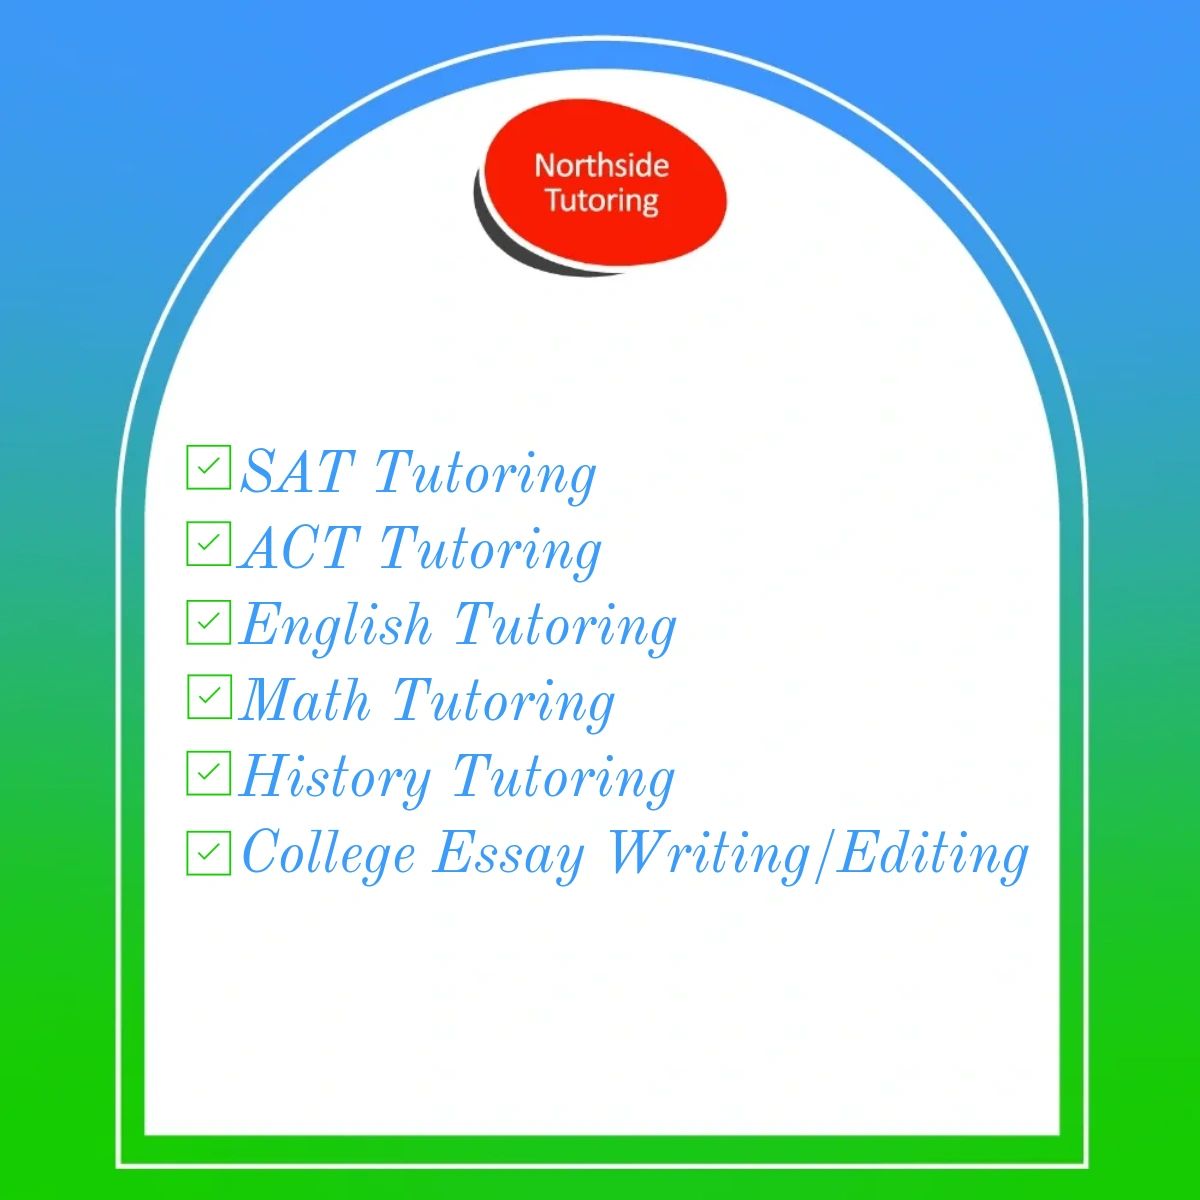 The list goes on! If your child could benefit from private tutoring services, chances are we can help. #NorthsideTutoring #SATTutoring #ACTTutoring #tutoring

linkedin.com/services/page/…